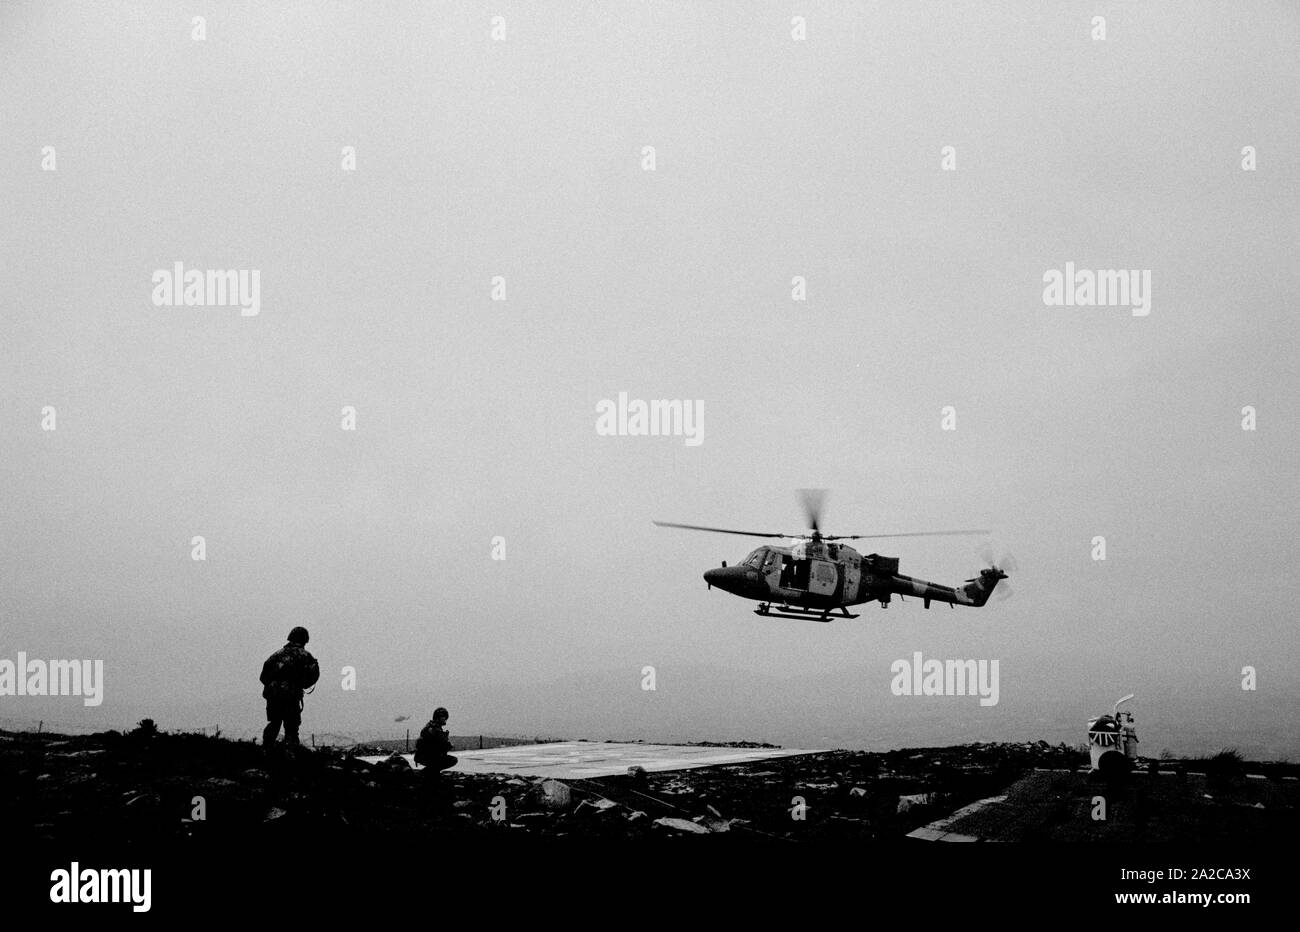 Soldiers from the Royal Scots (the Royal Regiment) army regiment, on patrol in Forkhill, South Armagh, Northern Ireland, in December 1992. Stock Photo